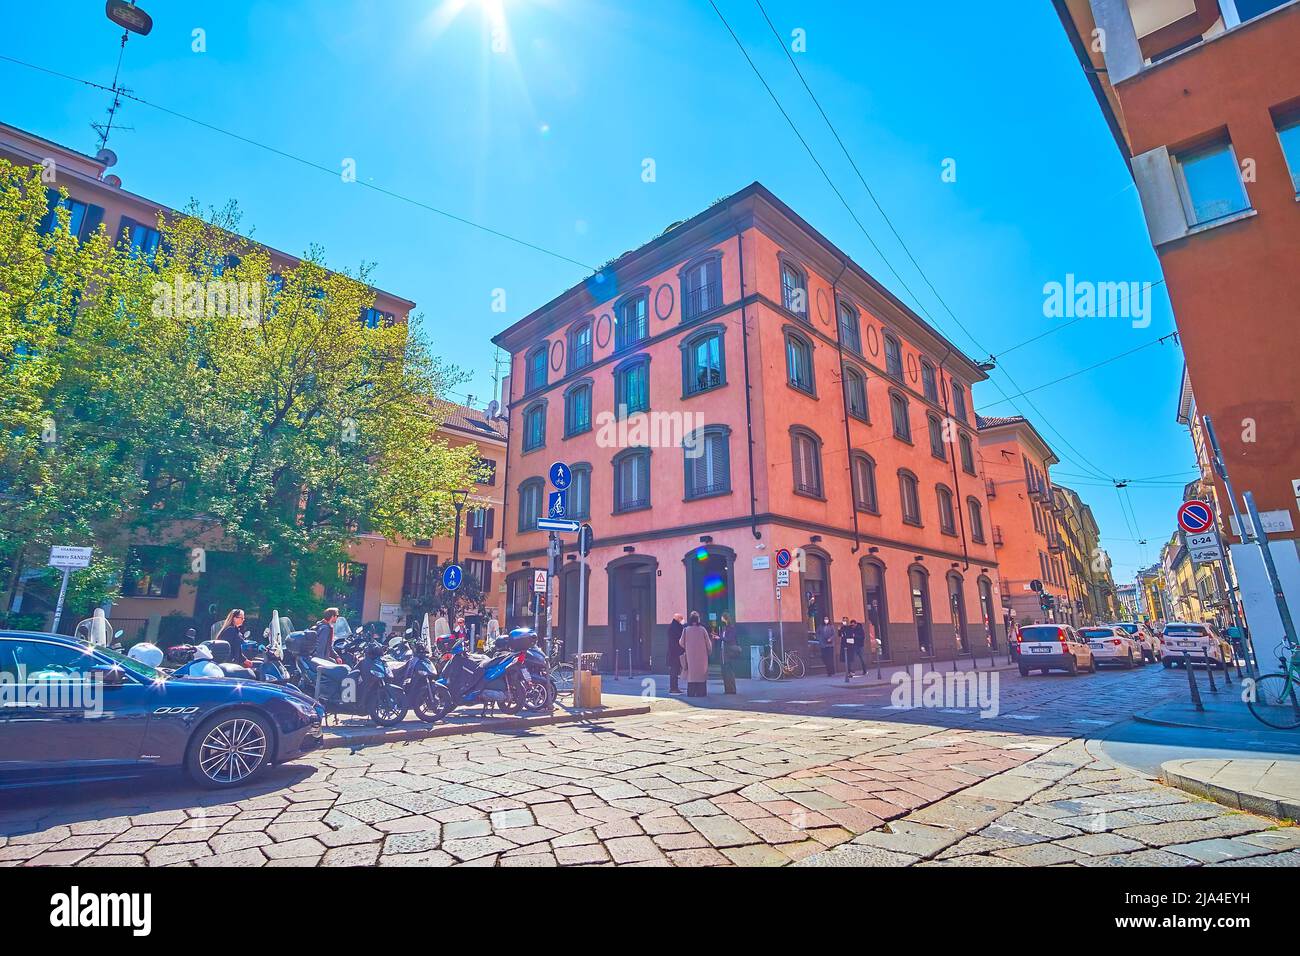 MILAN, ITALY - APRIL 5, 2022: The historical Brera district with beautiful buildings and numerous restaurants, on April 5 in Milan, Italy Stock Photo